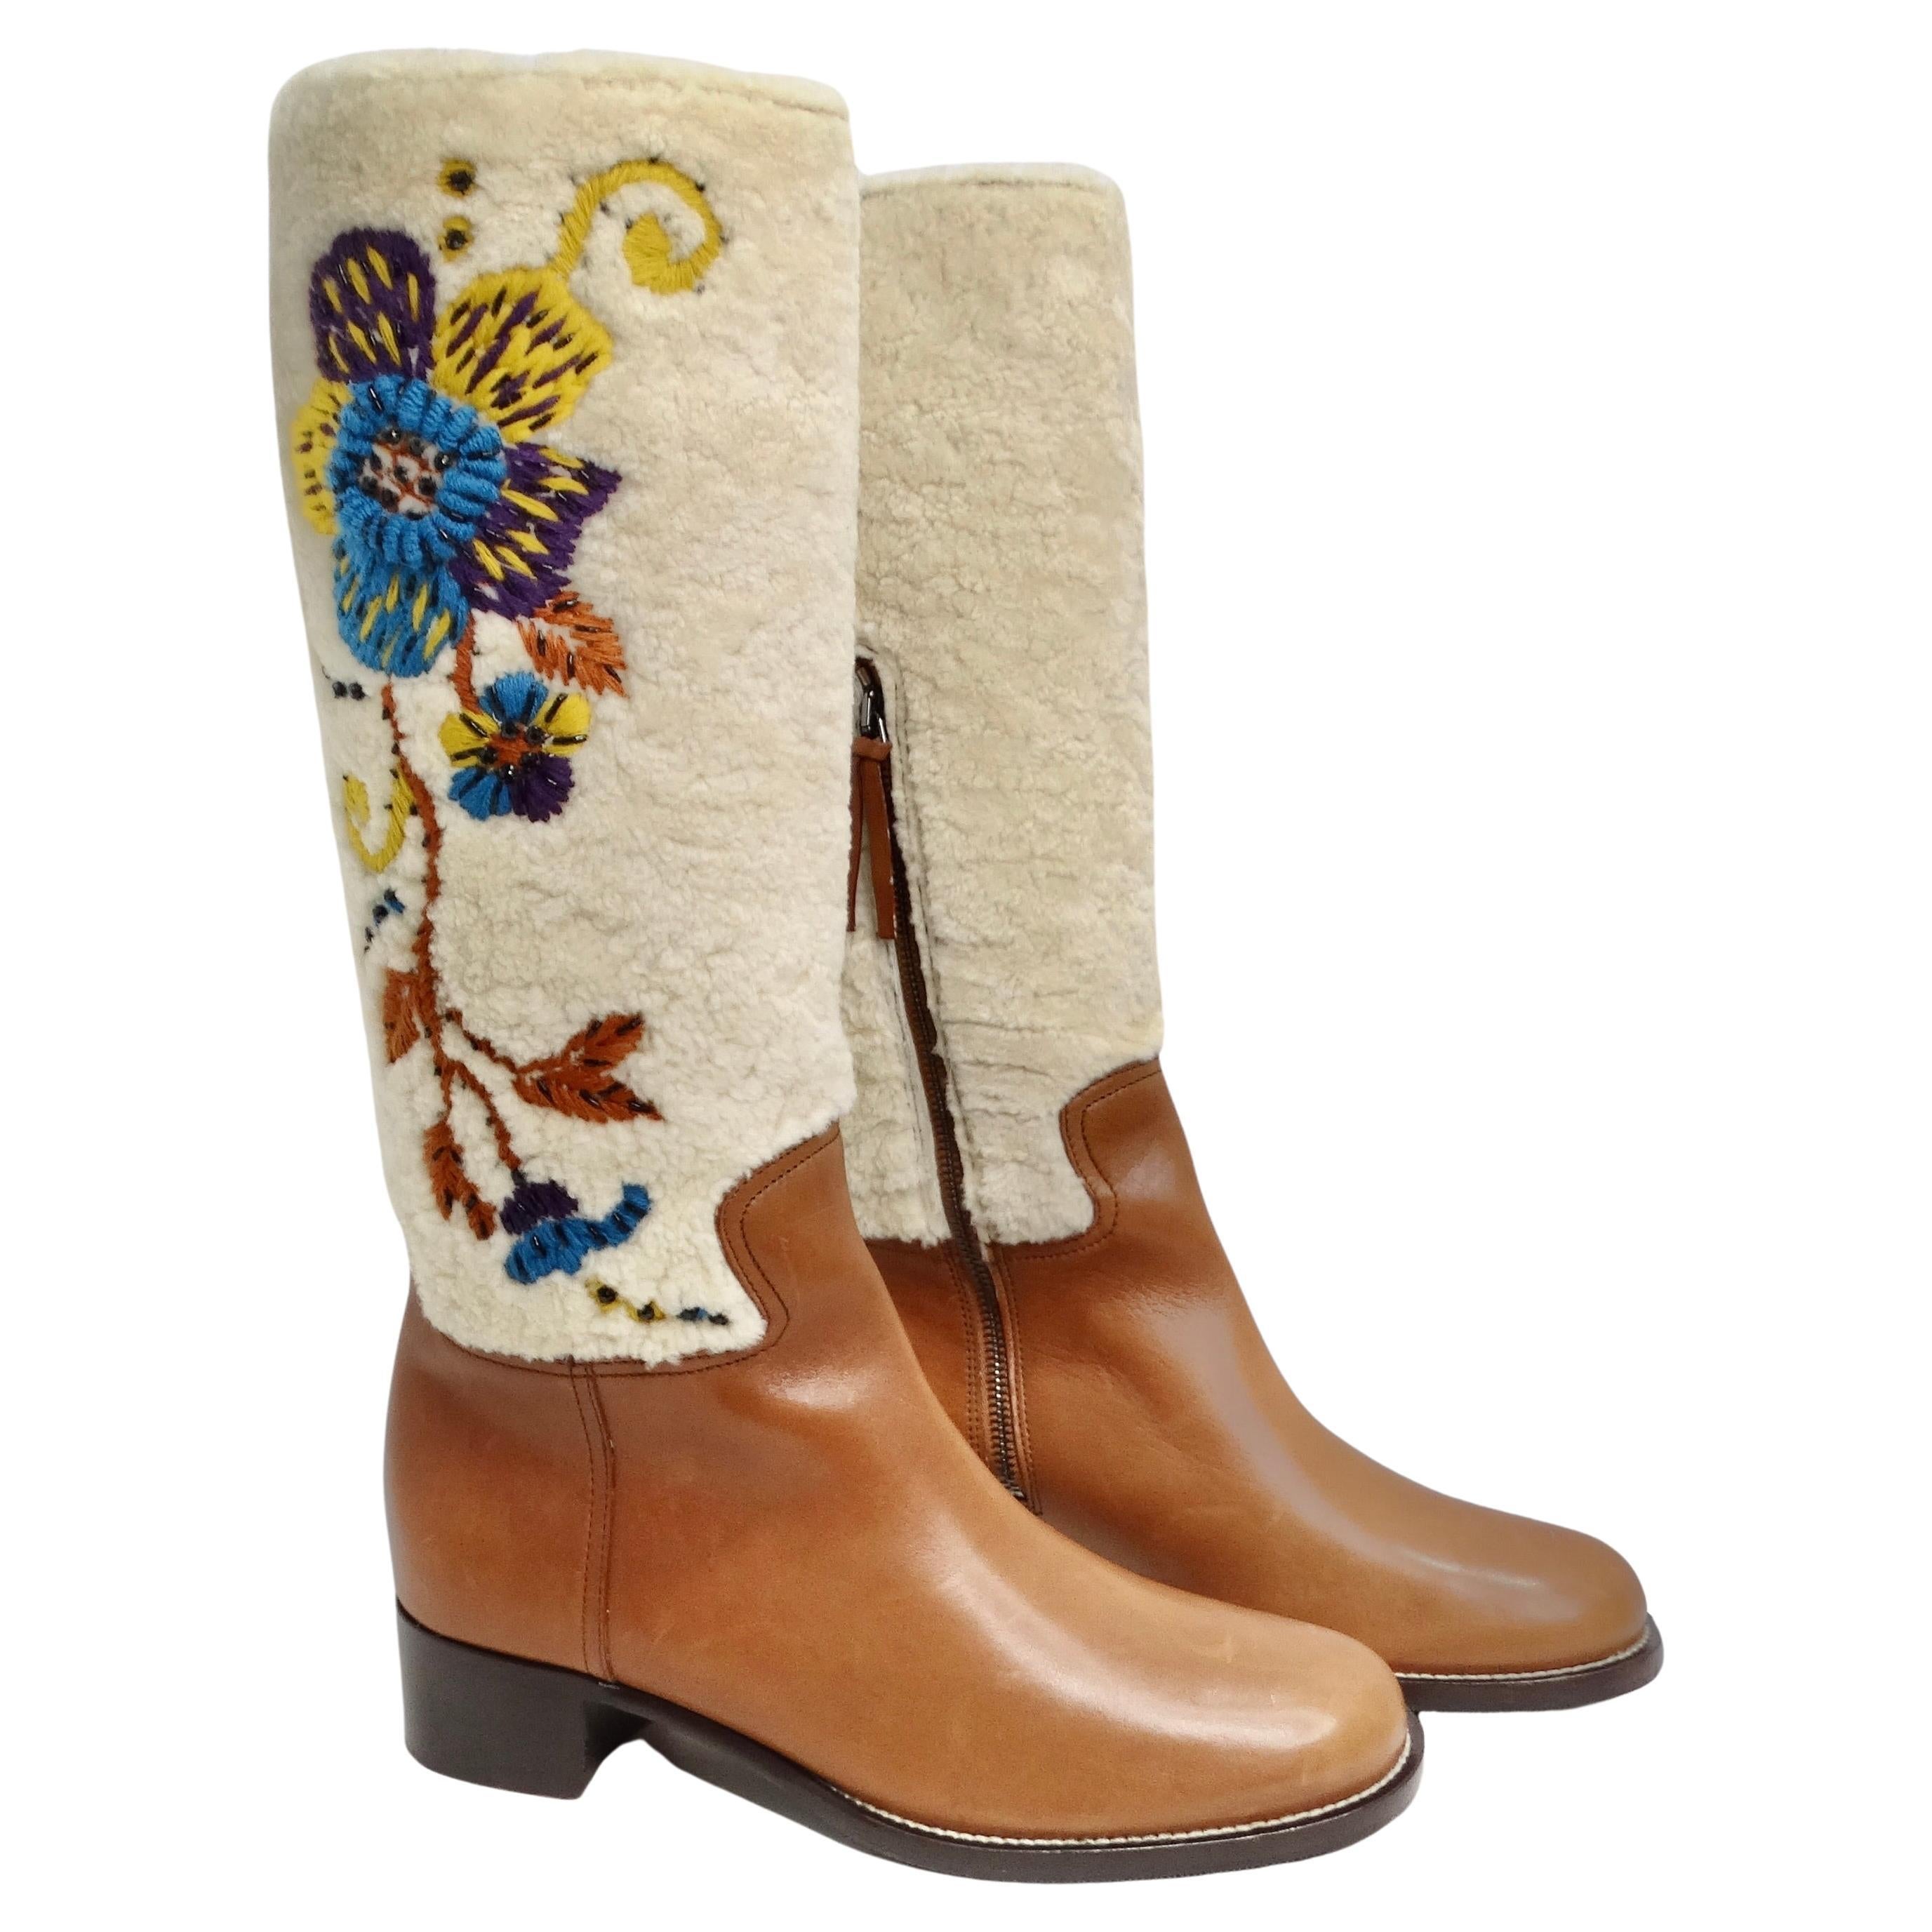  Miu Miu Floral Brown Leather Floral Shearling Riding Boots For Sale